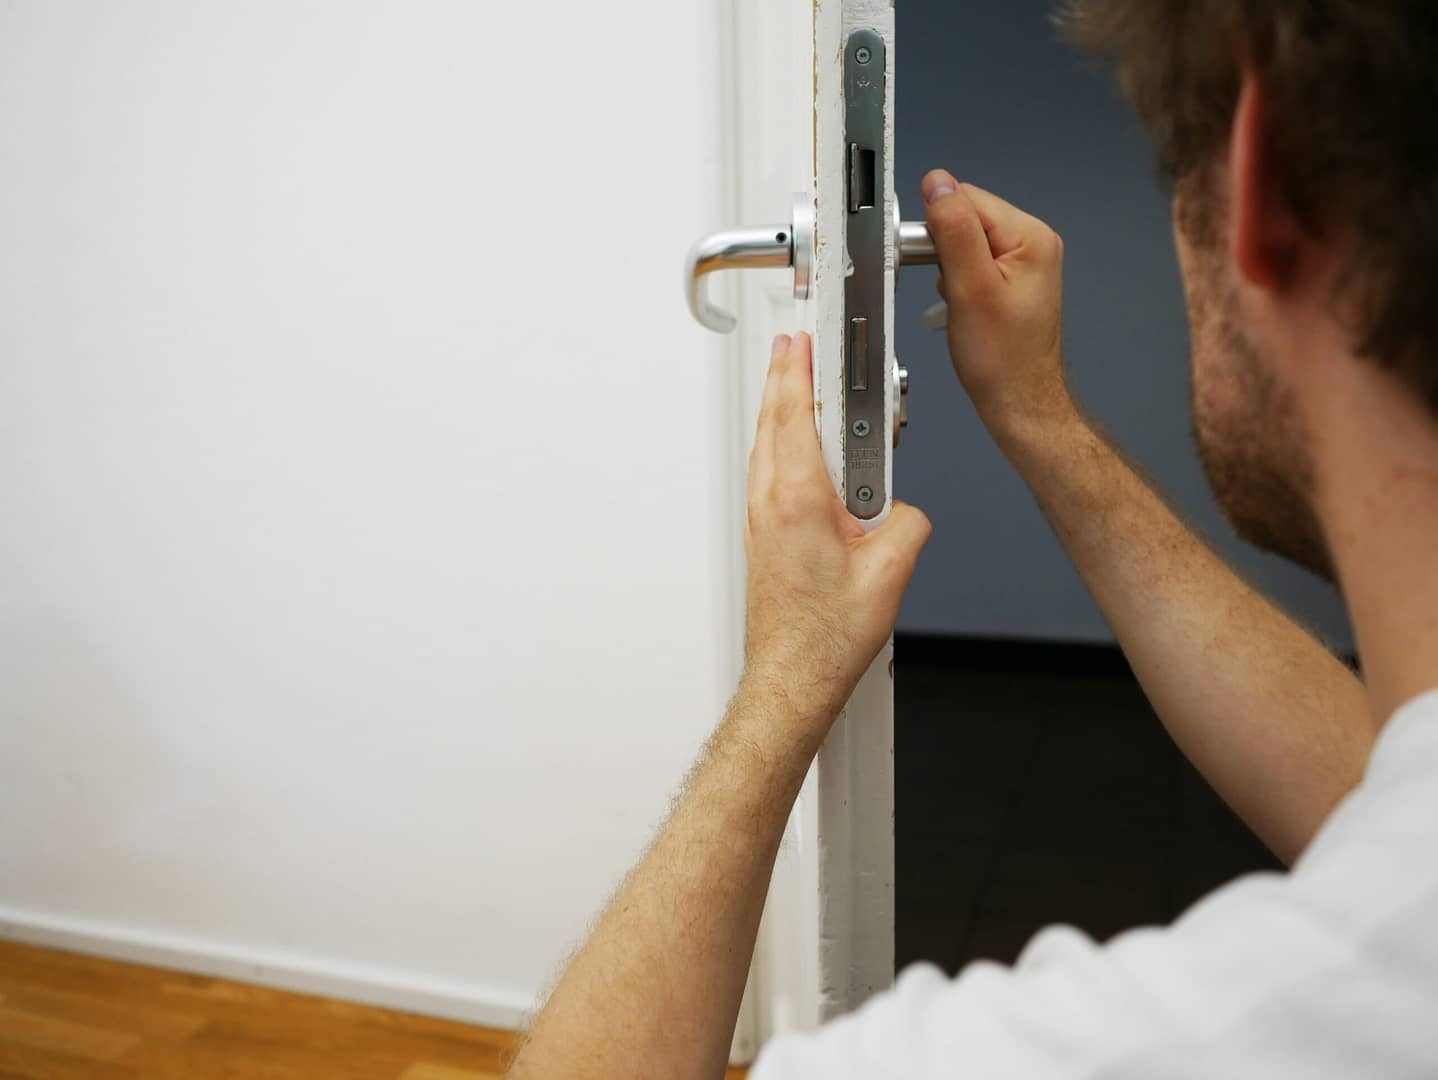 A man carefully adjusts a door mechanism to prevent accidental lockouts.